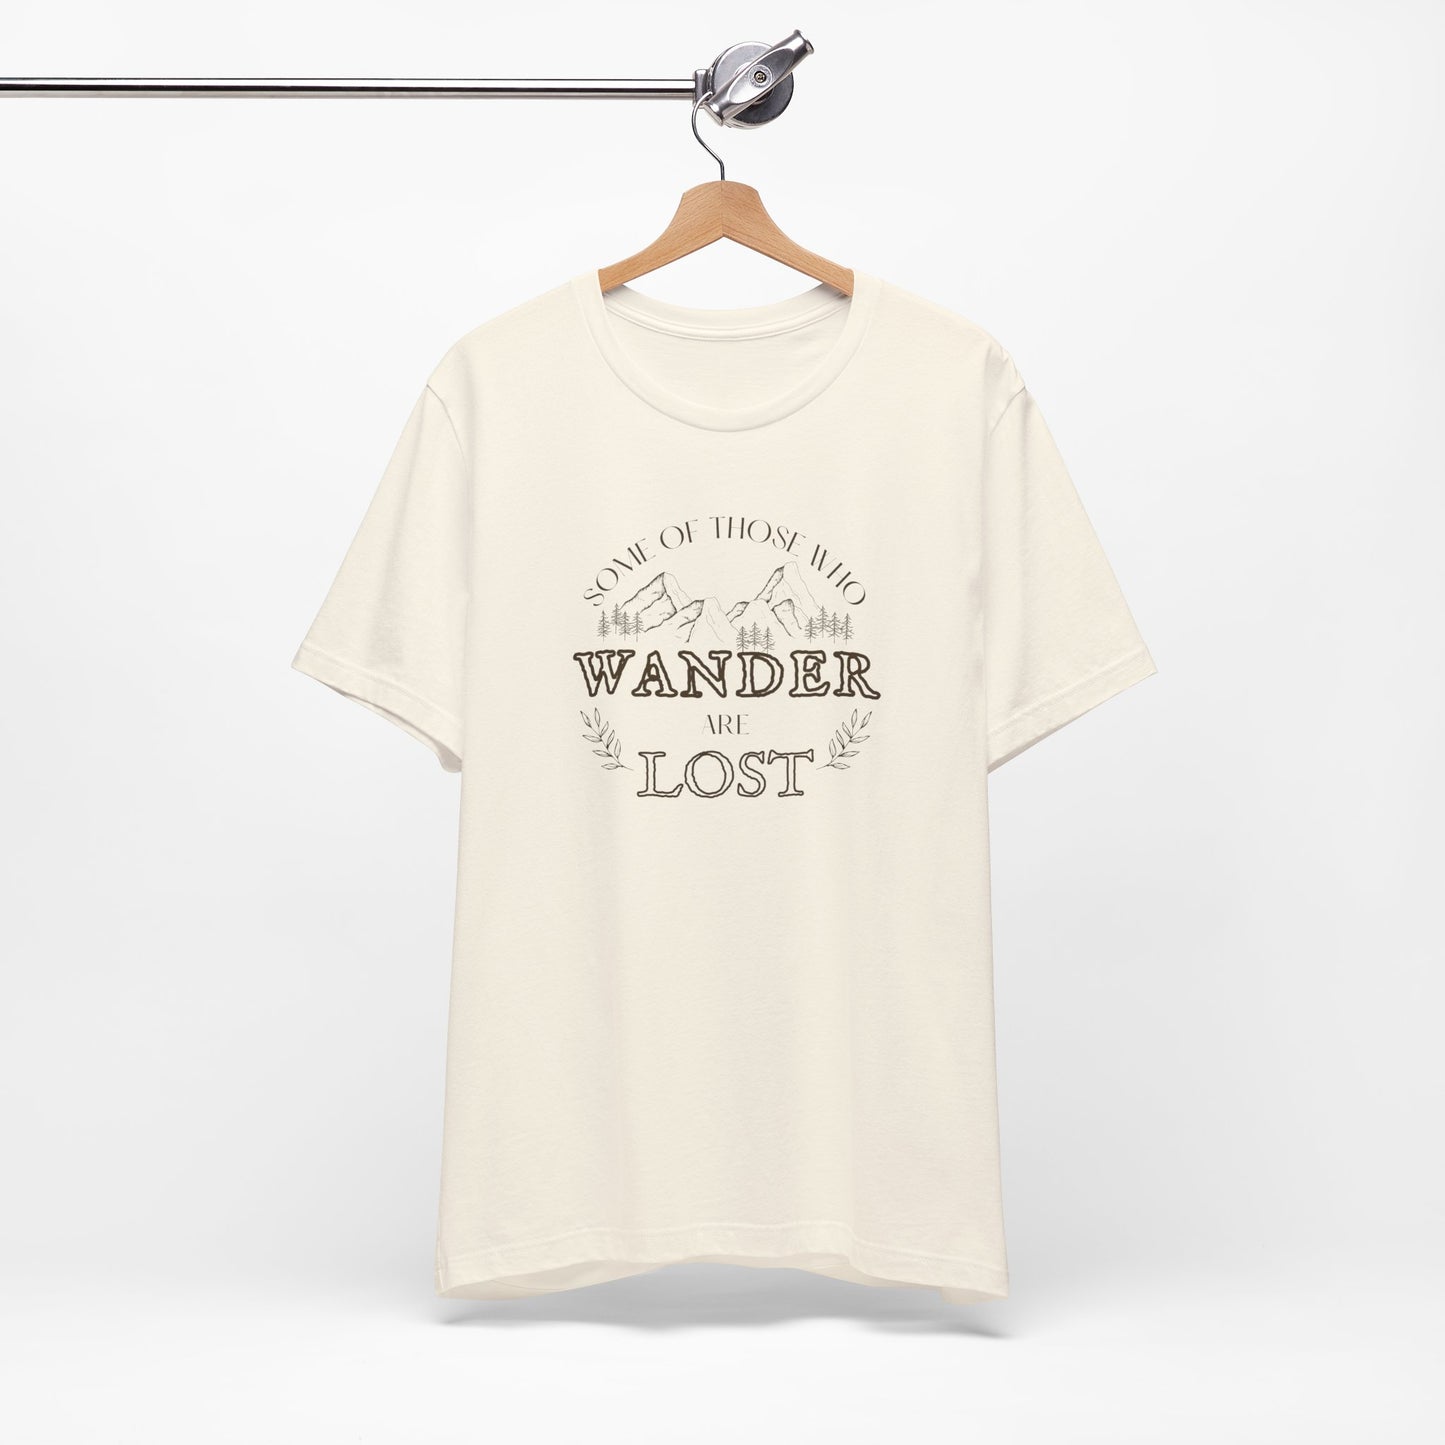 Some Of Us Who Wander | T Shirt